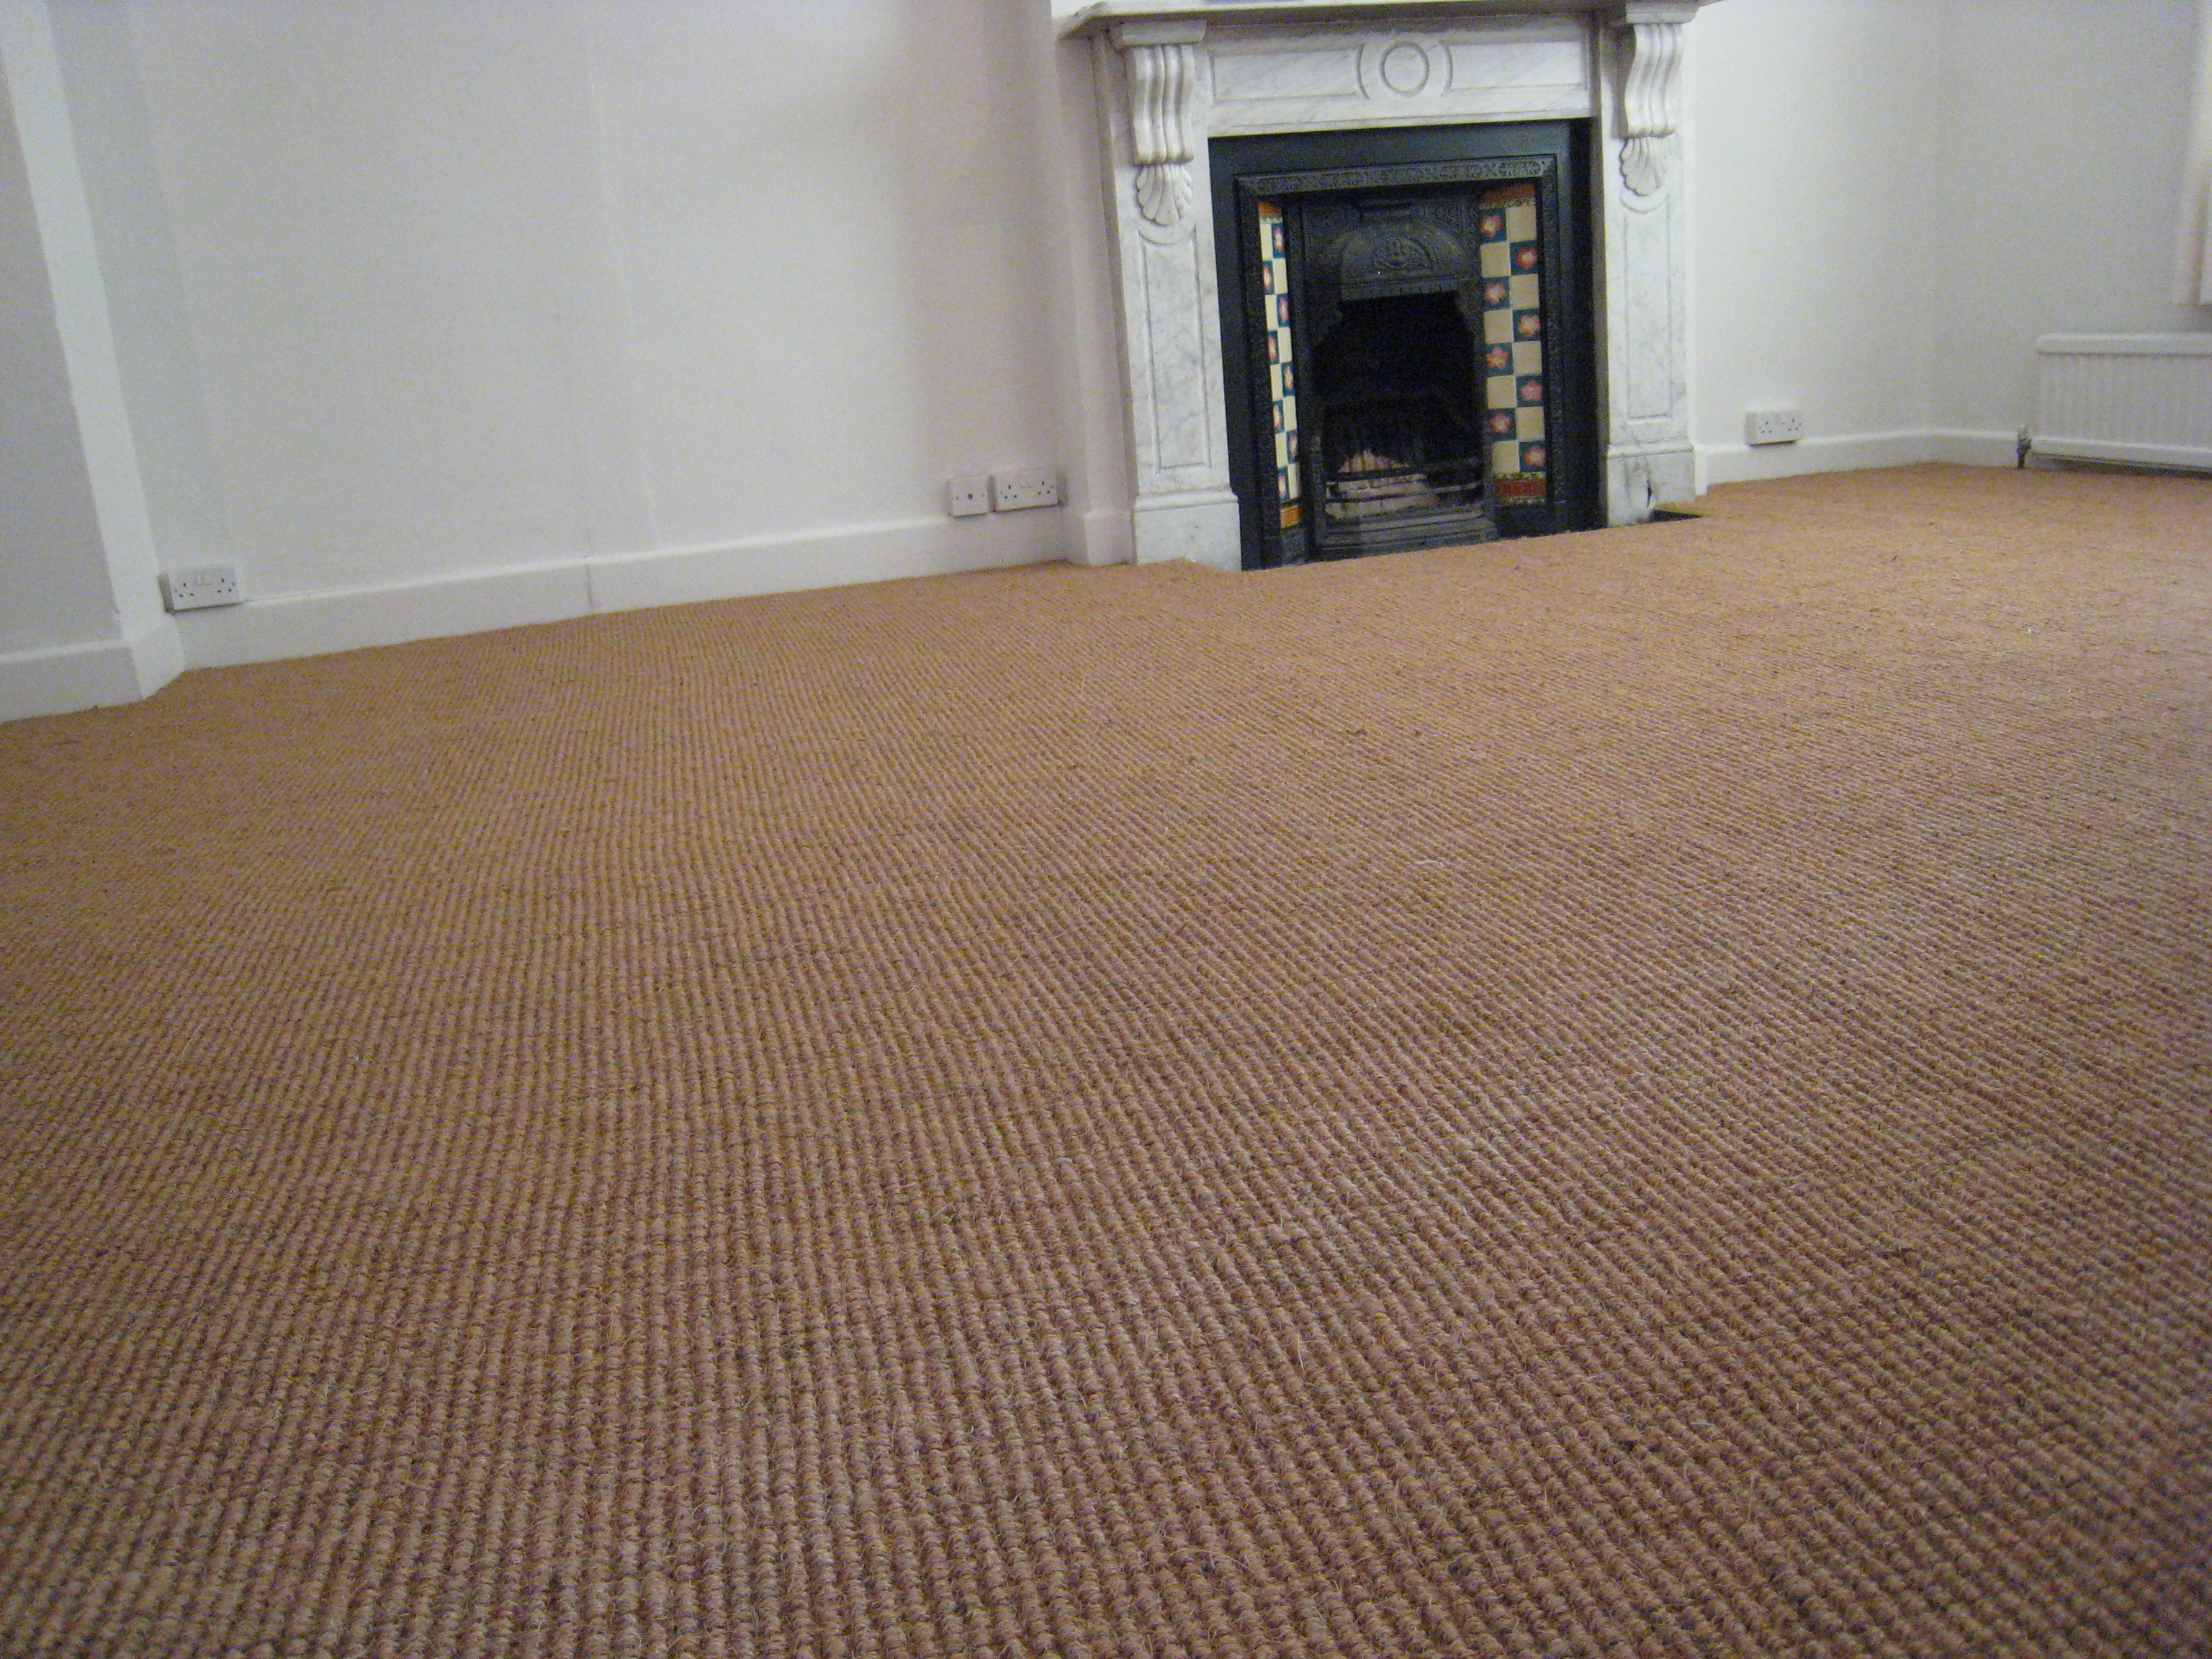 The pros Are Maintaining These Tips on Hiring A Carpet Cleaner From You 1